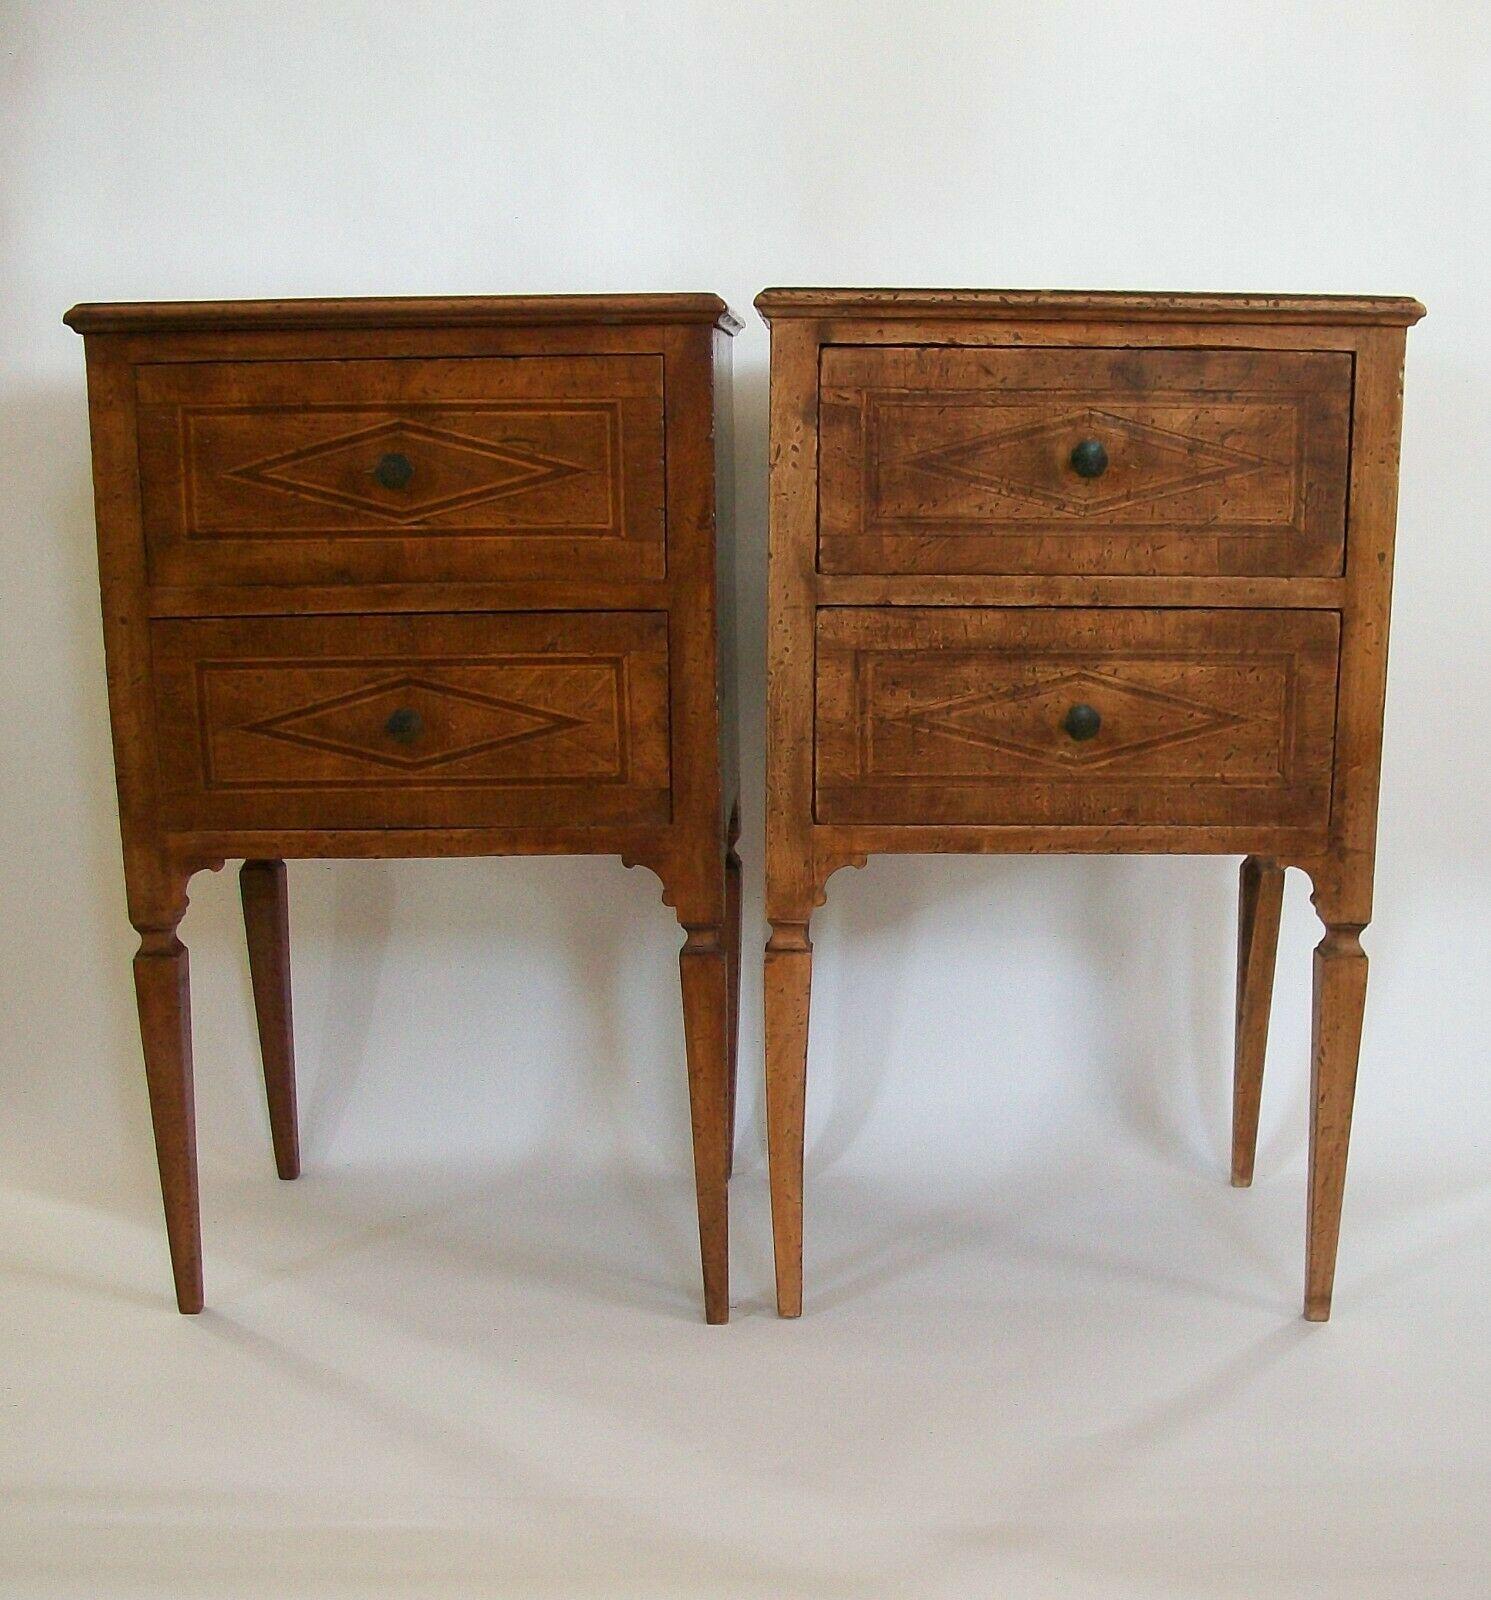 Fine pair of North Italian Neoclassical walnut bedside tables - two drawers to each table - expertly hand crafted - waxed finish - doweled construction (no apparent nails) - featuring diamond inlaid lozenges with rectangular borders in marquetry to